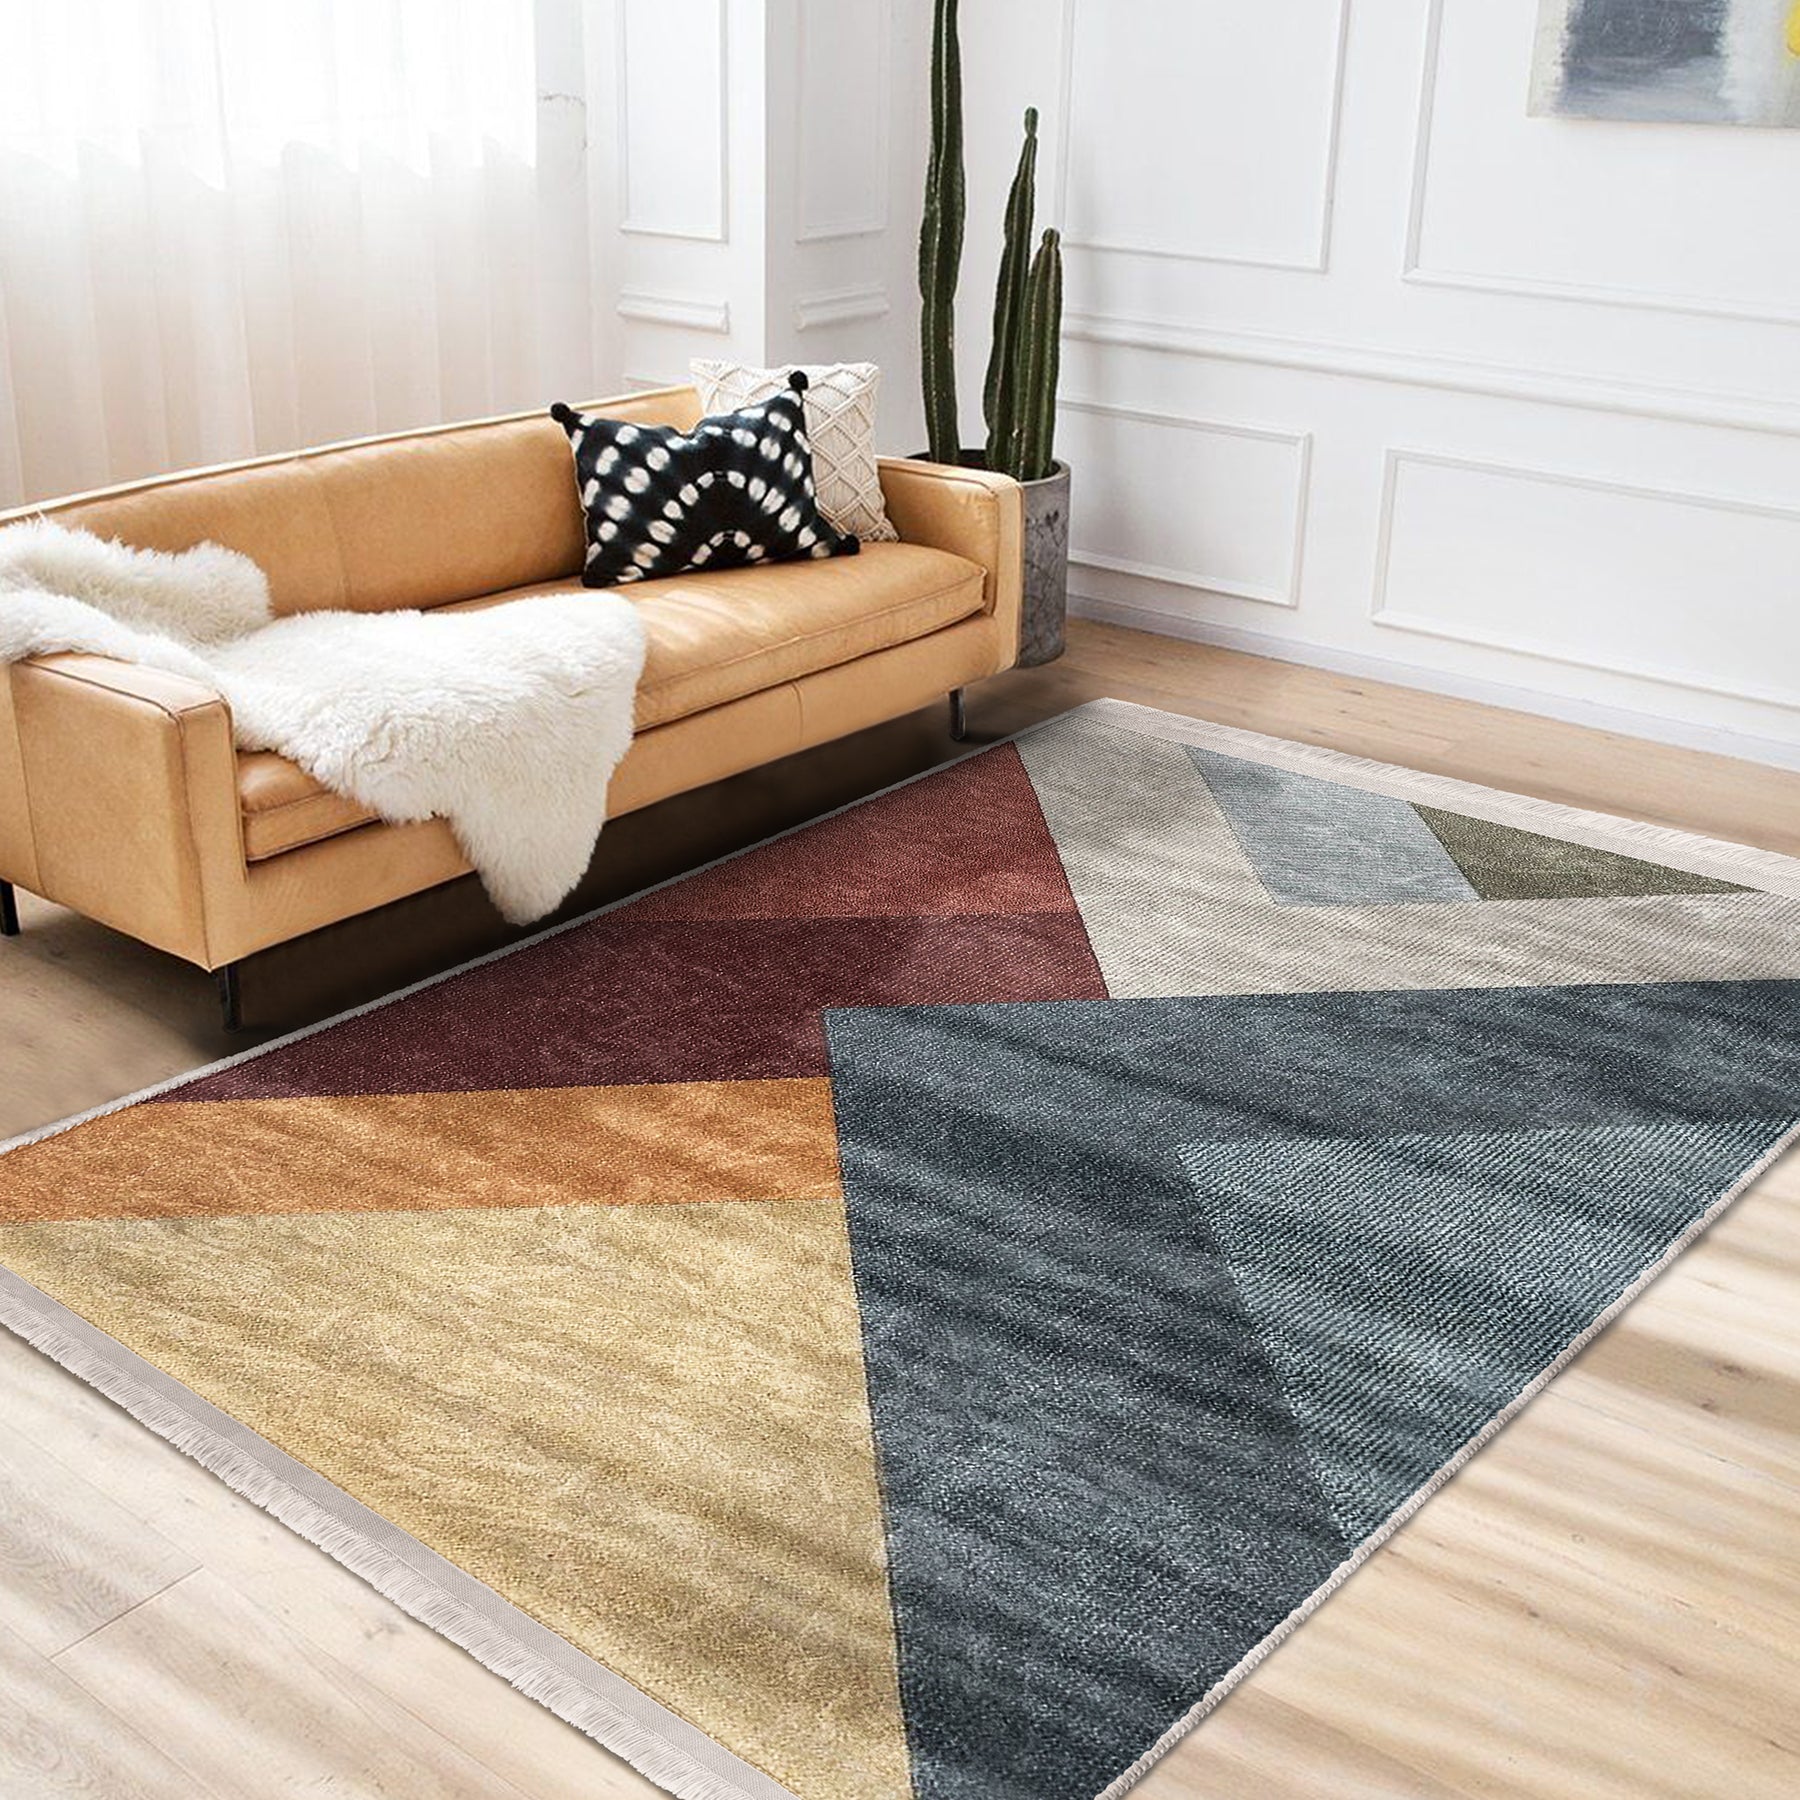 Triangle Patterned Decorative Rug for a Stylish and Dynamic Interior